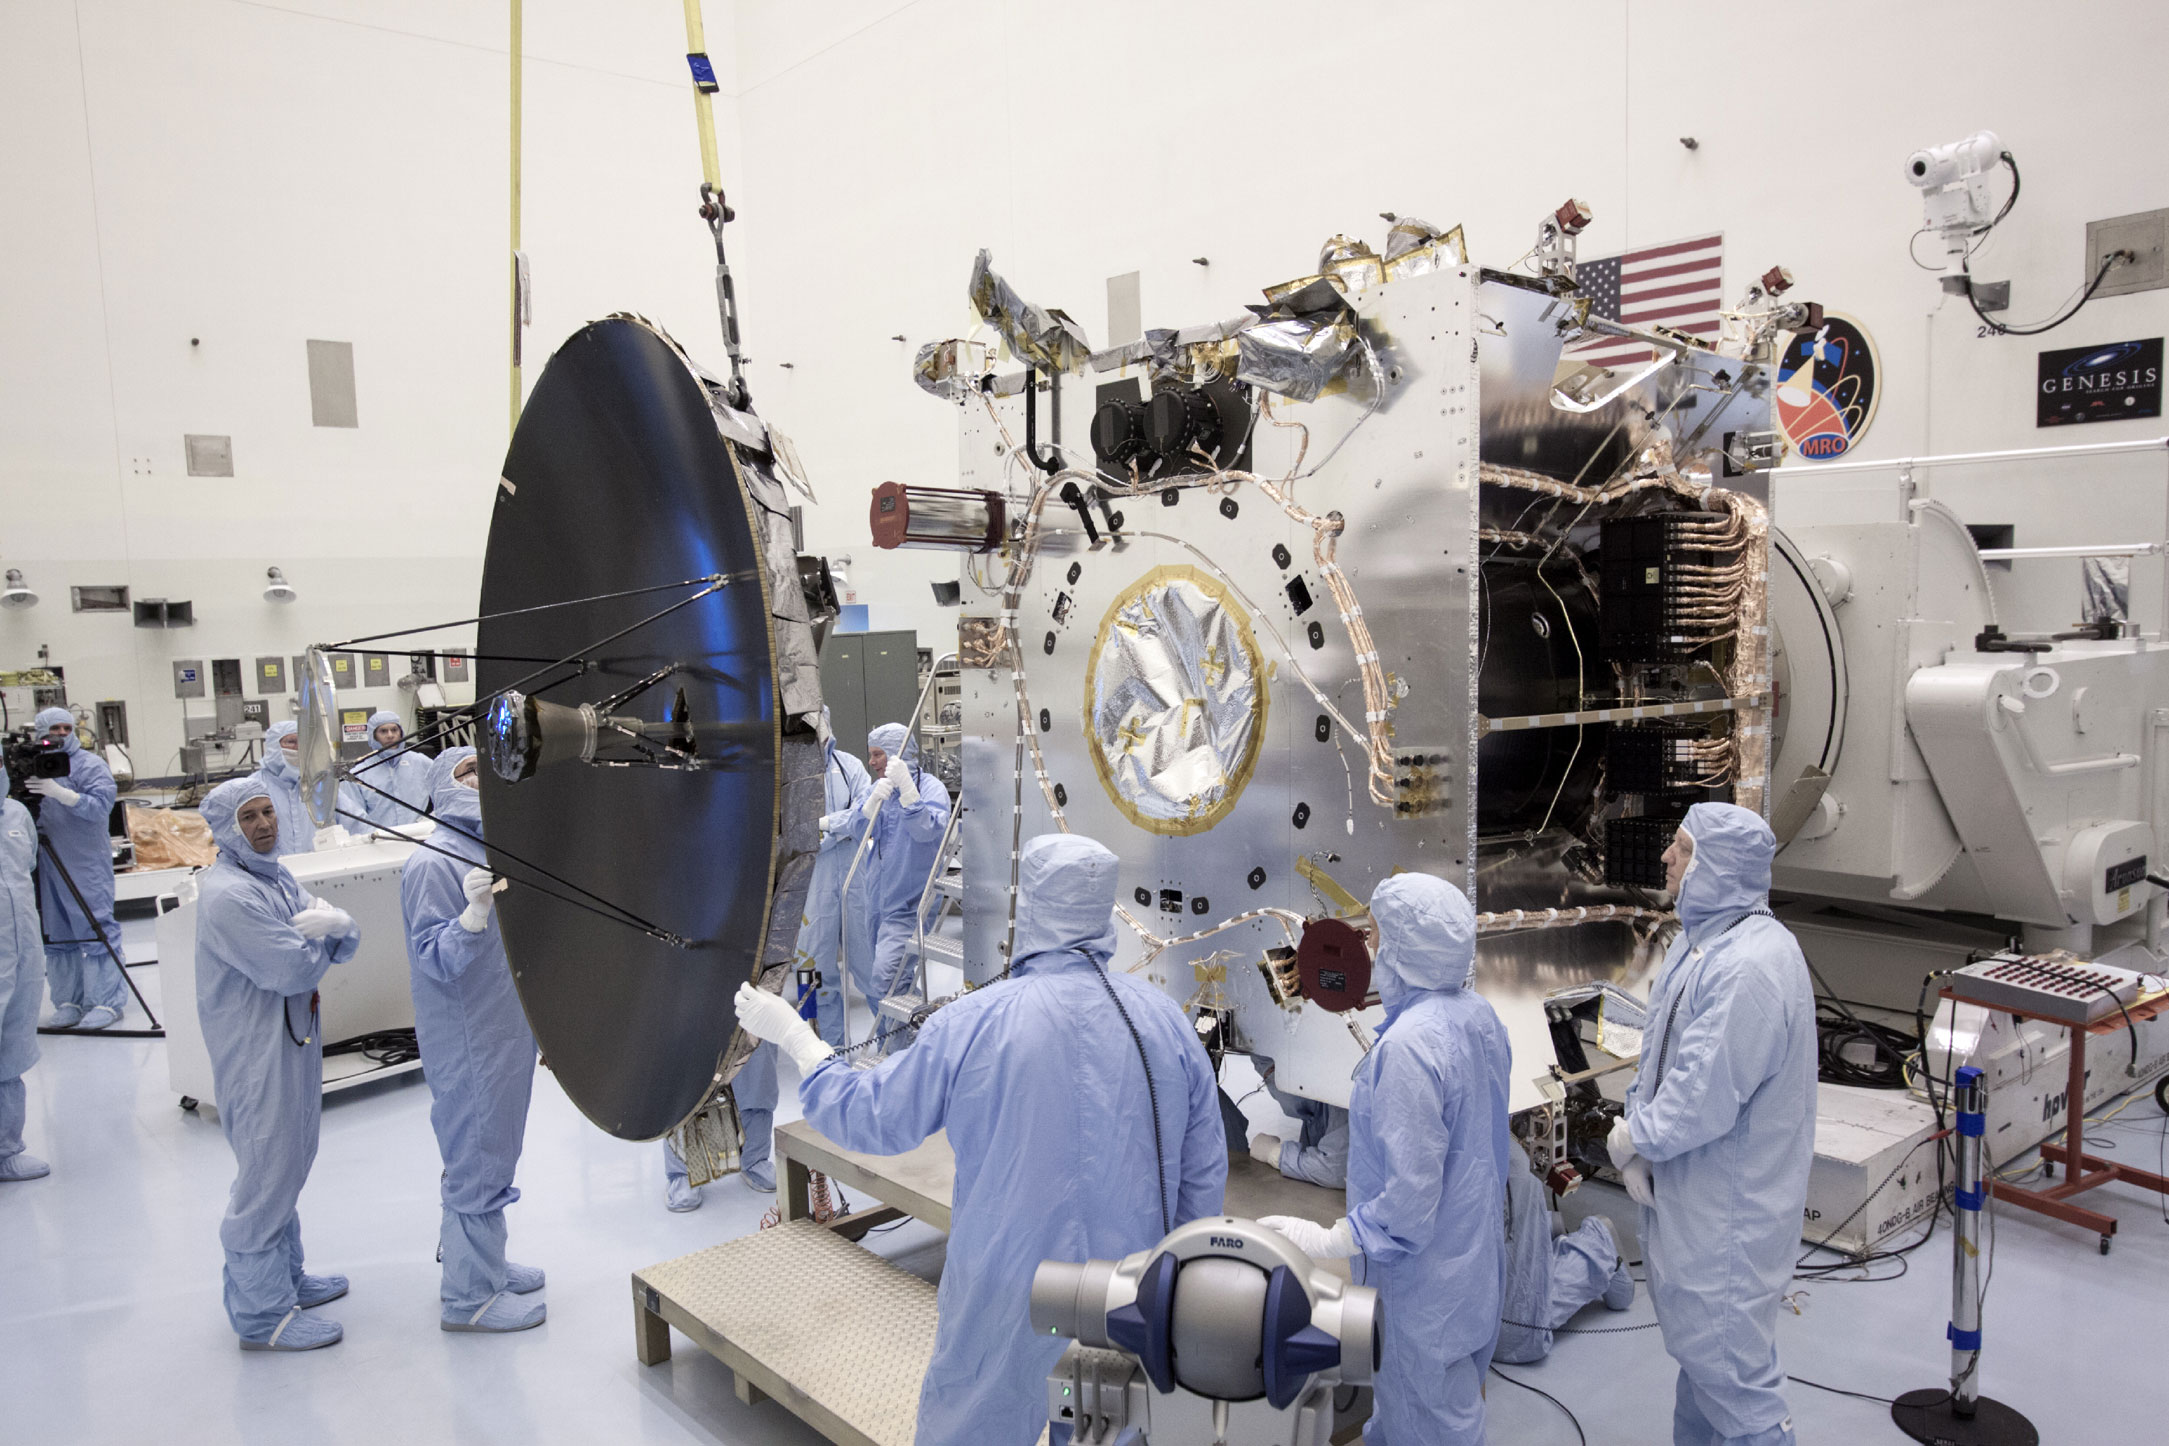 Technicians install the parabolic high gain antenna onto the MAVEN spacecraft in the Payload Hazardous Servicing Facility on Aug. 9, 2013. The antenna will communicate vast amounts of data to Earth during the mission.